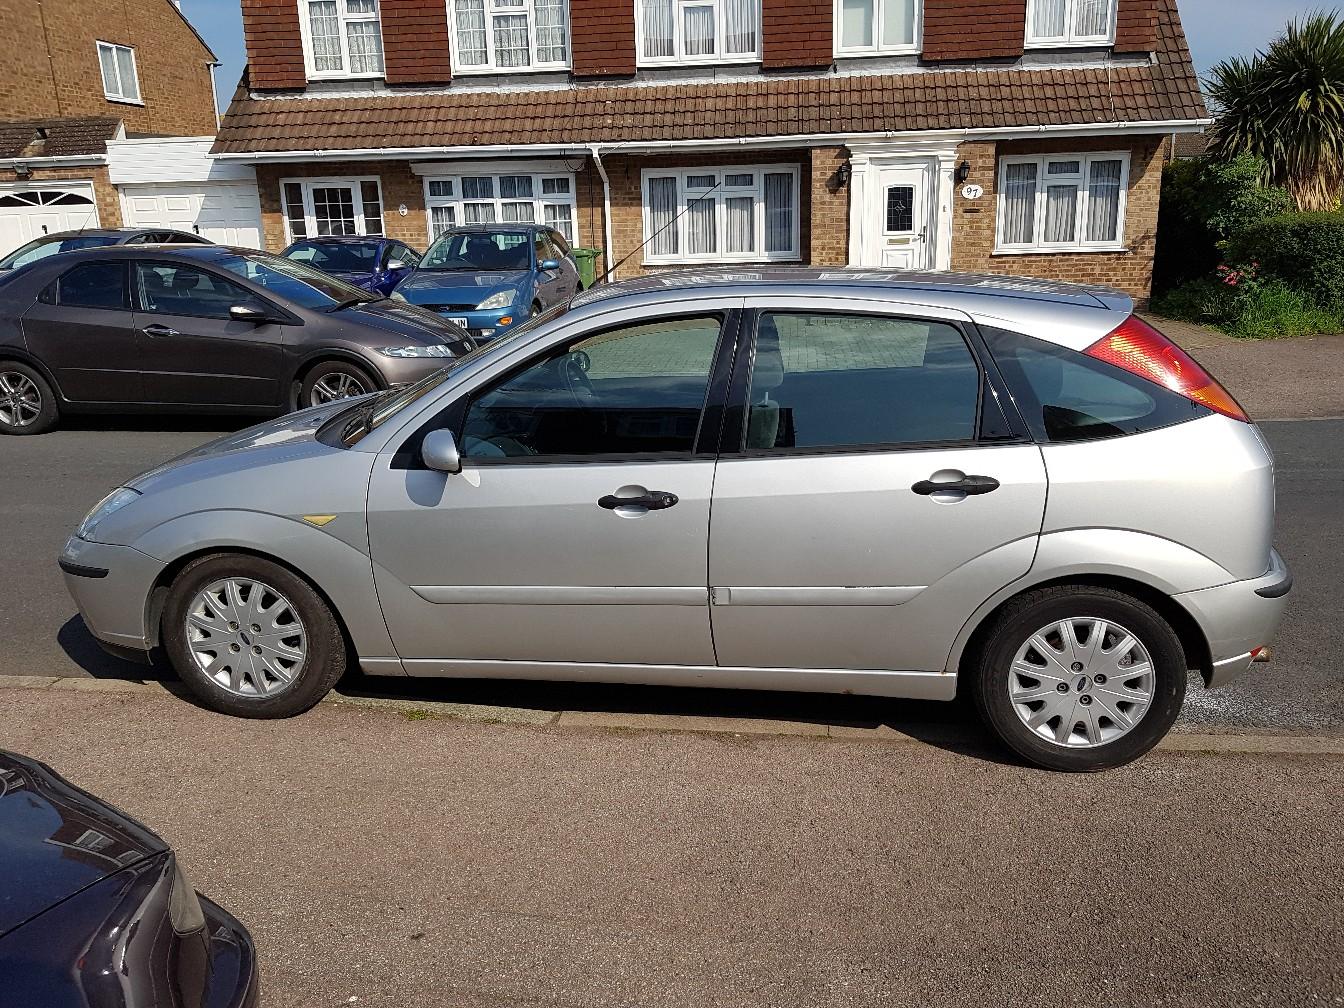 Ford Focus MK1 2003 in Broxbourne for £400.00 for sale